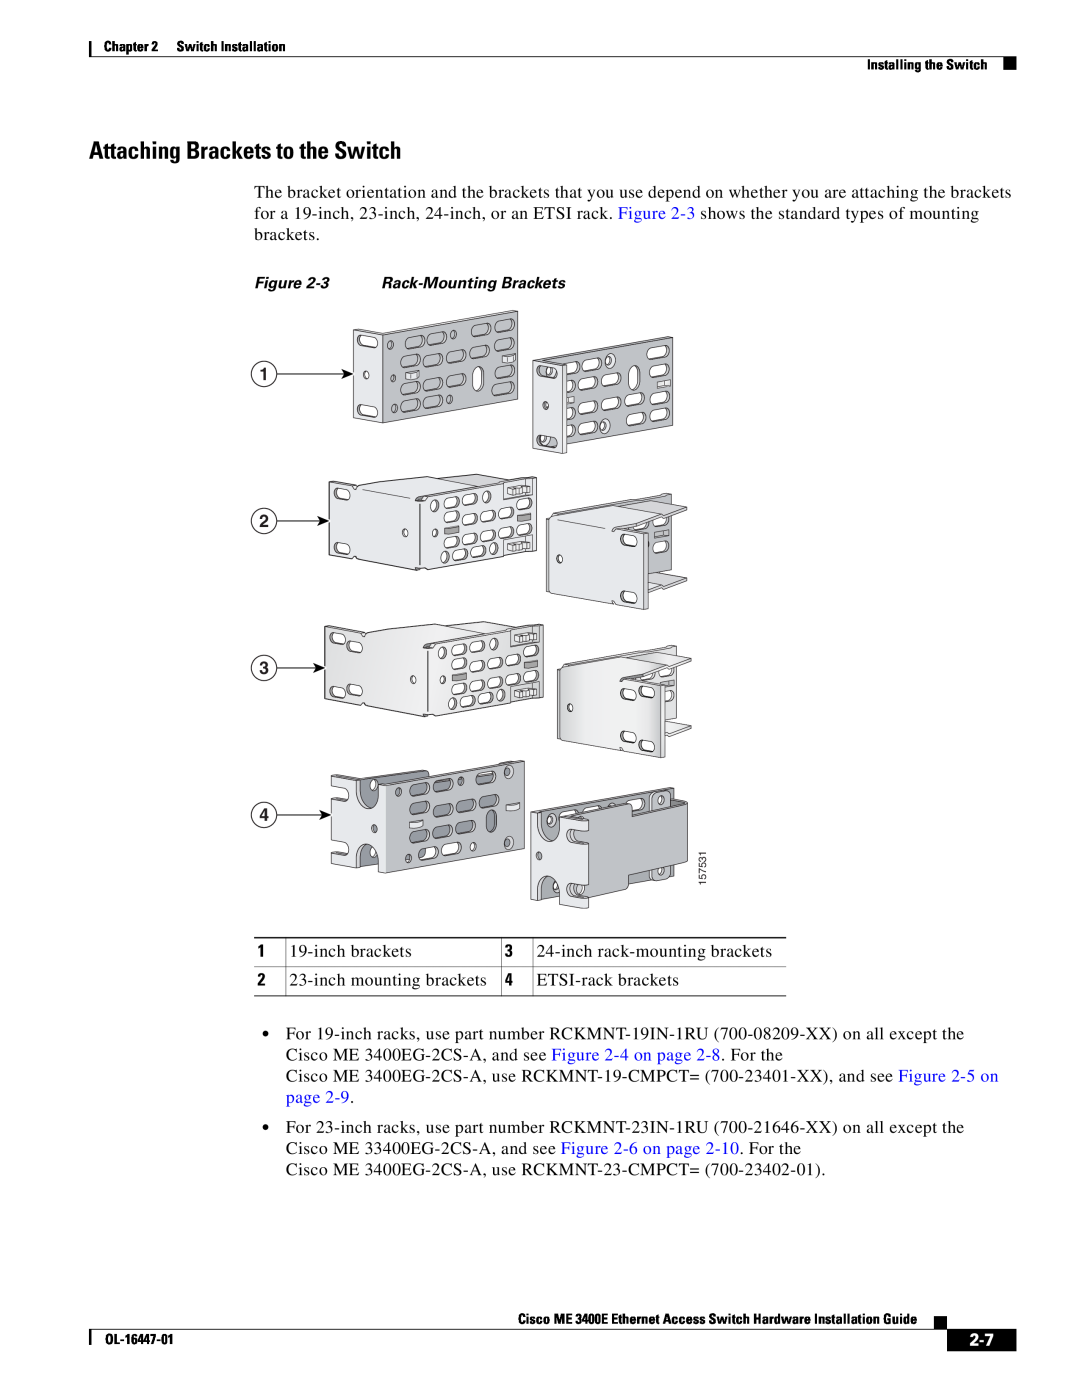 Cisco Systems OL-16447-01 manual Attaching Brackets to the Switch 